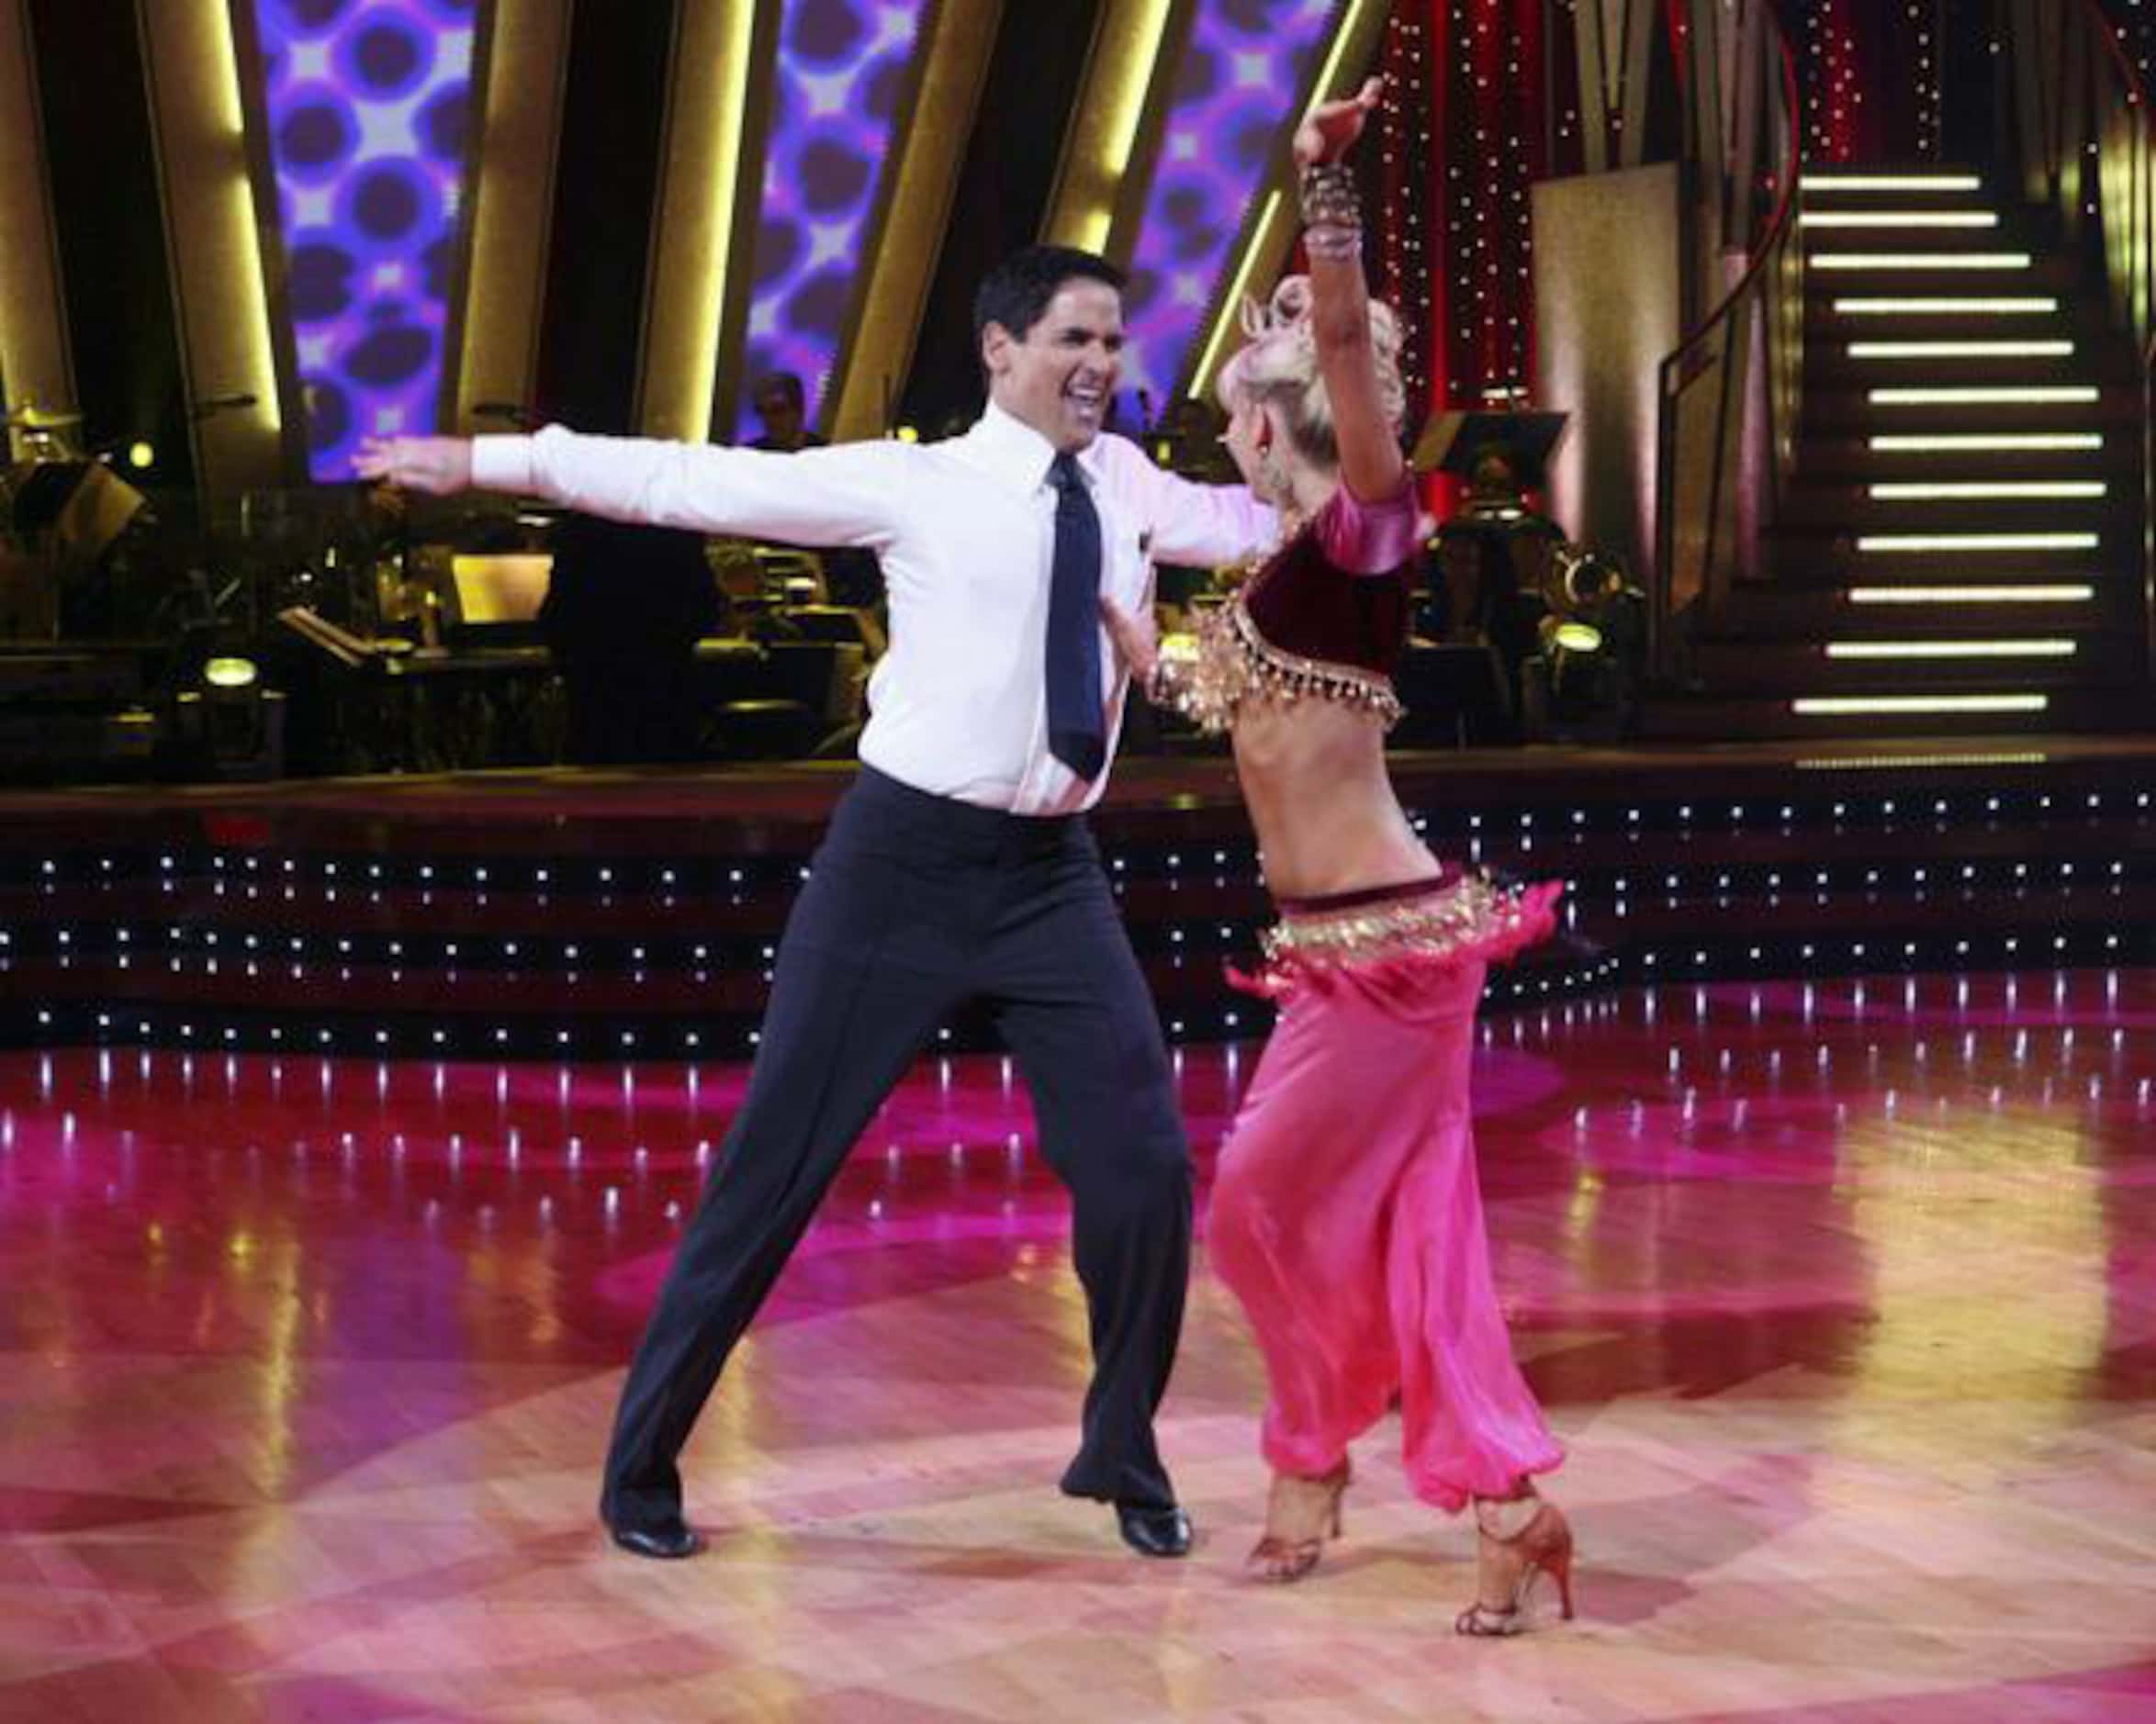 October 23, 2007: Mavs owner Mark Cuban as a contestant on ABC's "Dancing with the Stars."